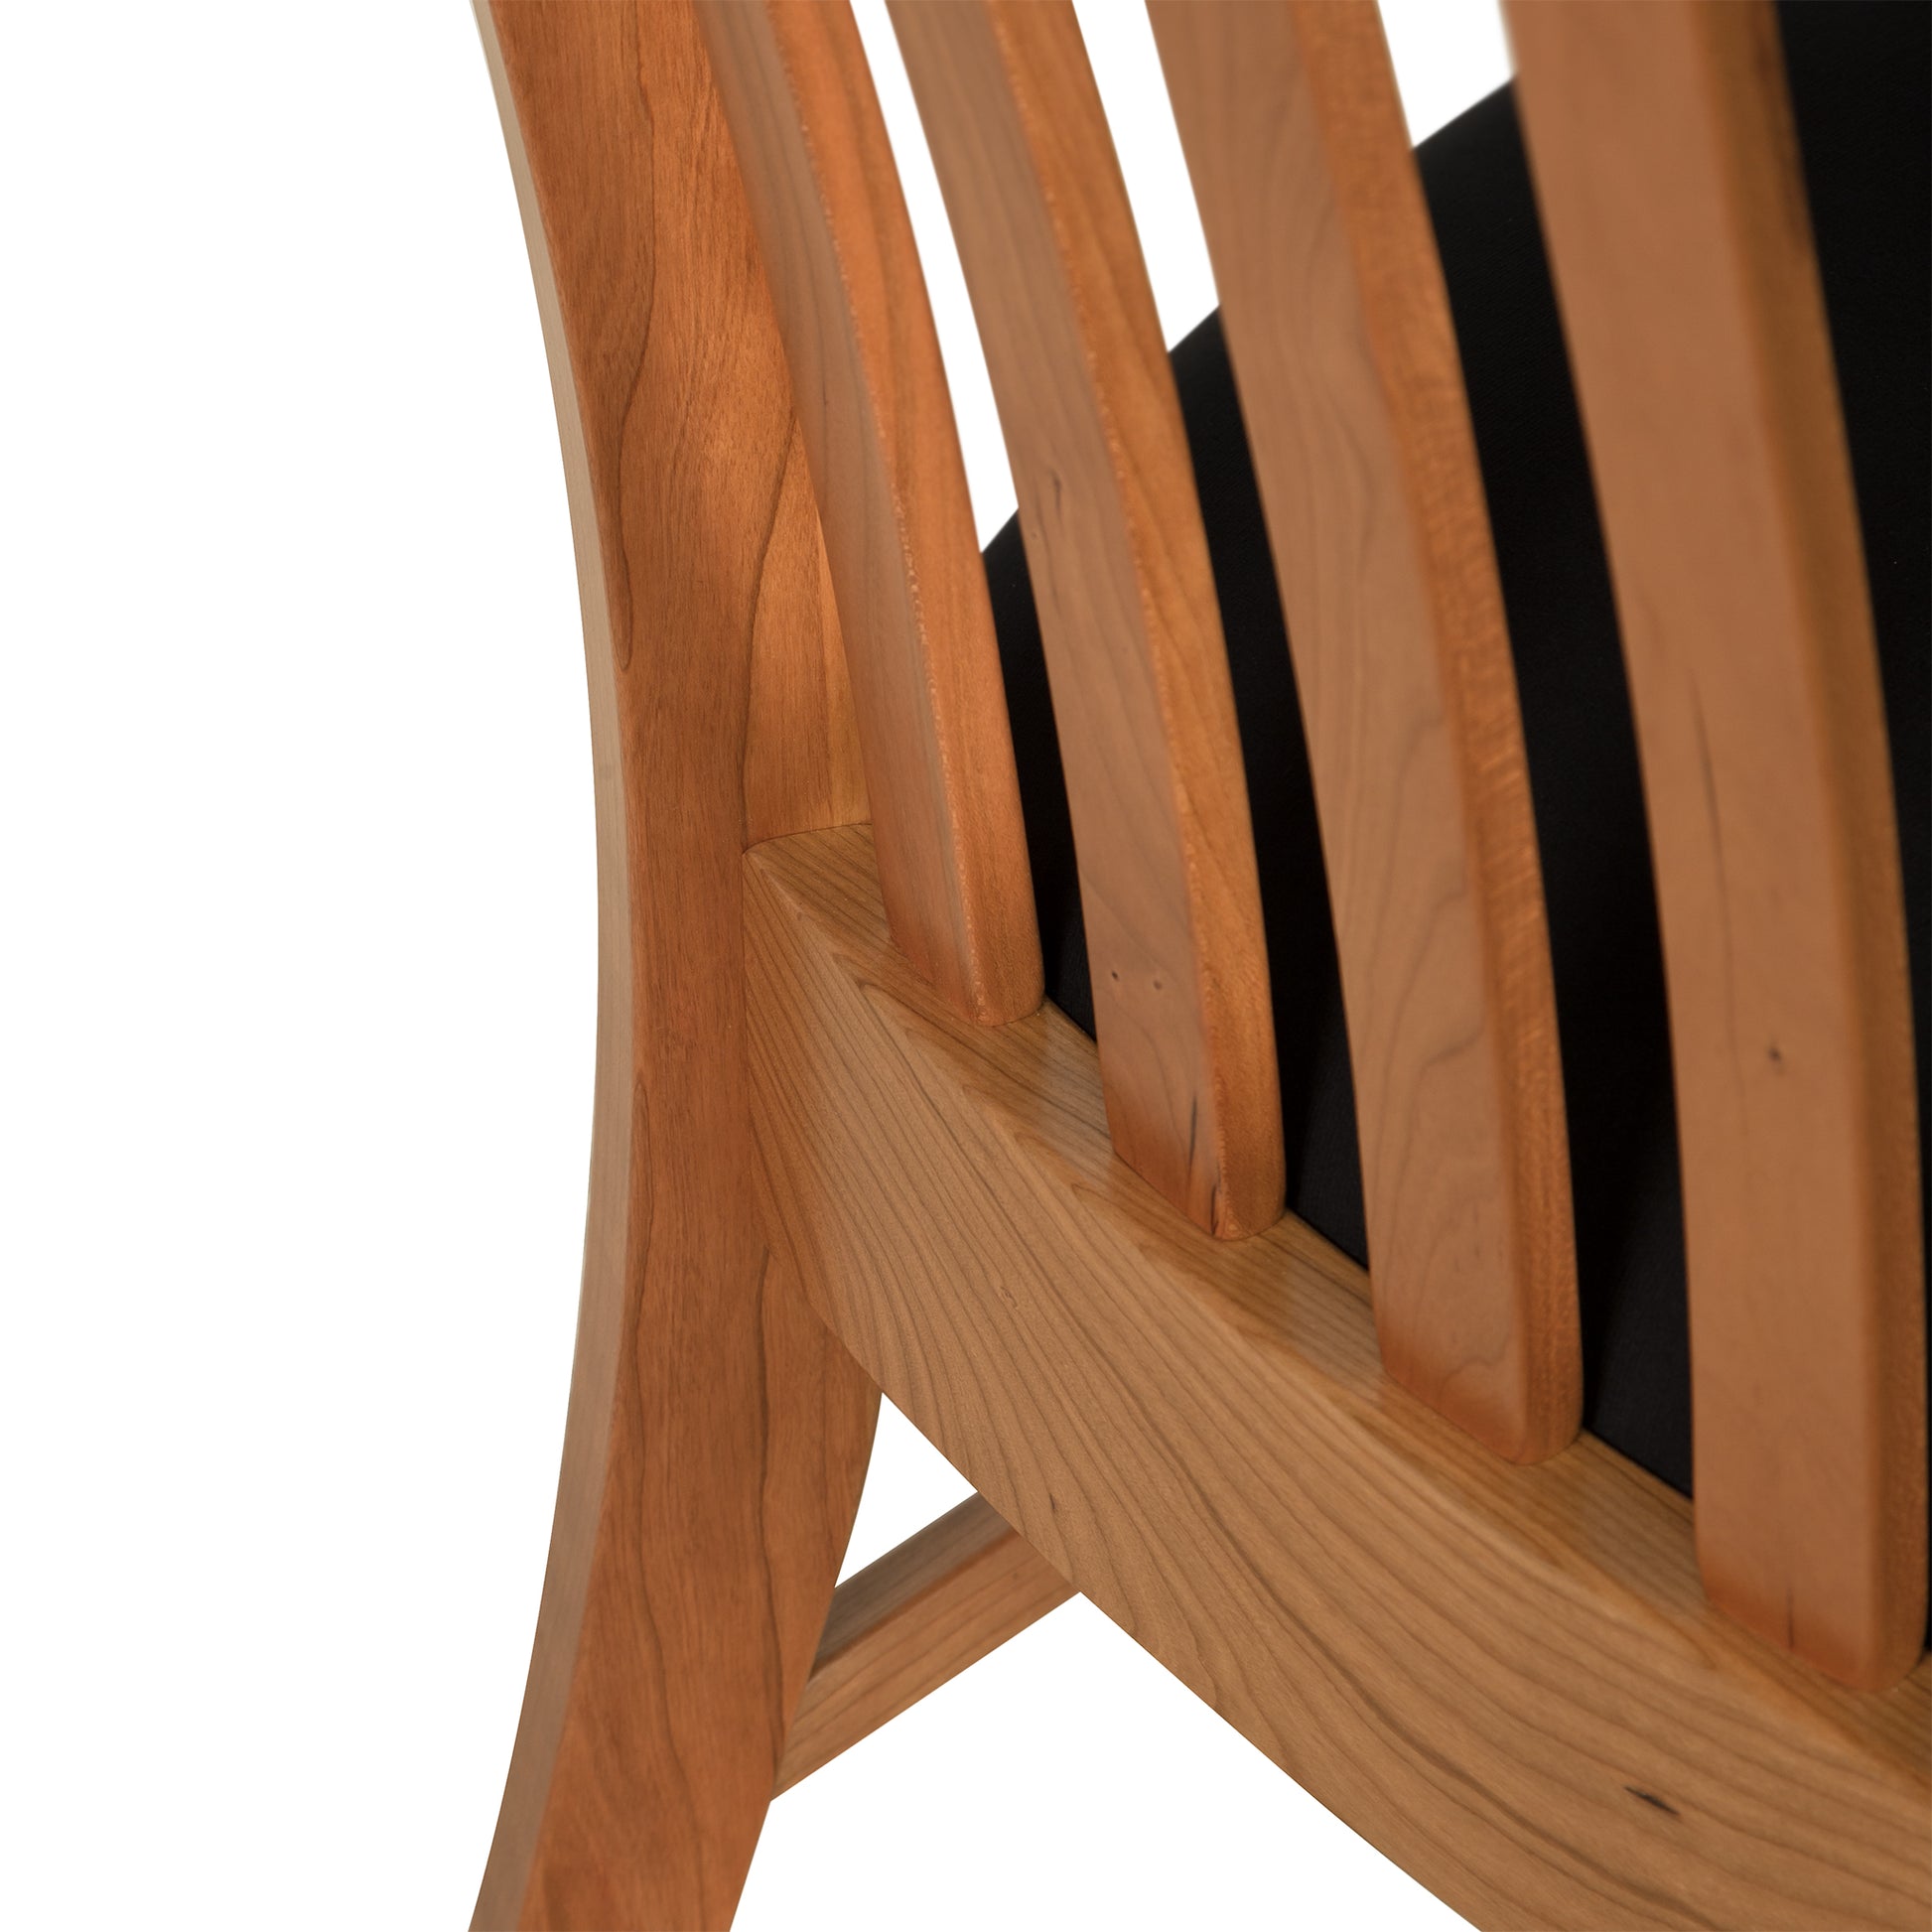 Close-up of a Vermont Woods Studios Country Shaker Chair showing the detailed craftsmanship of the smooth, curved frame and the vertical slats against a white background.